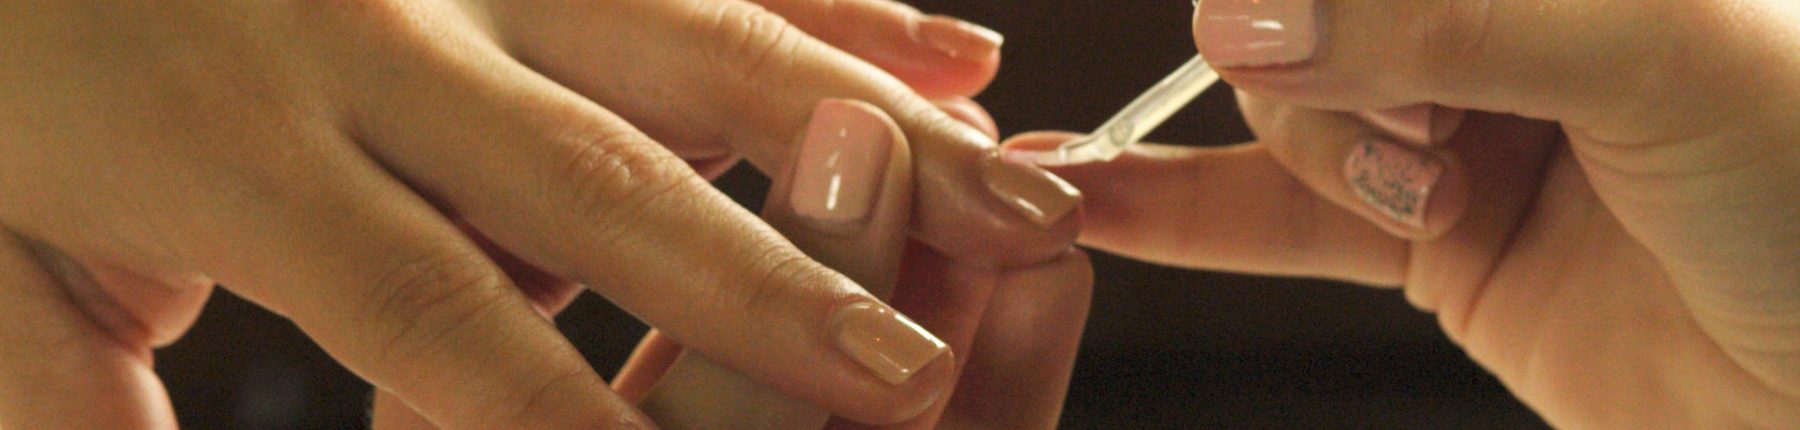 aesthetician's hand applying nail polish to the client's nails